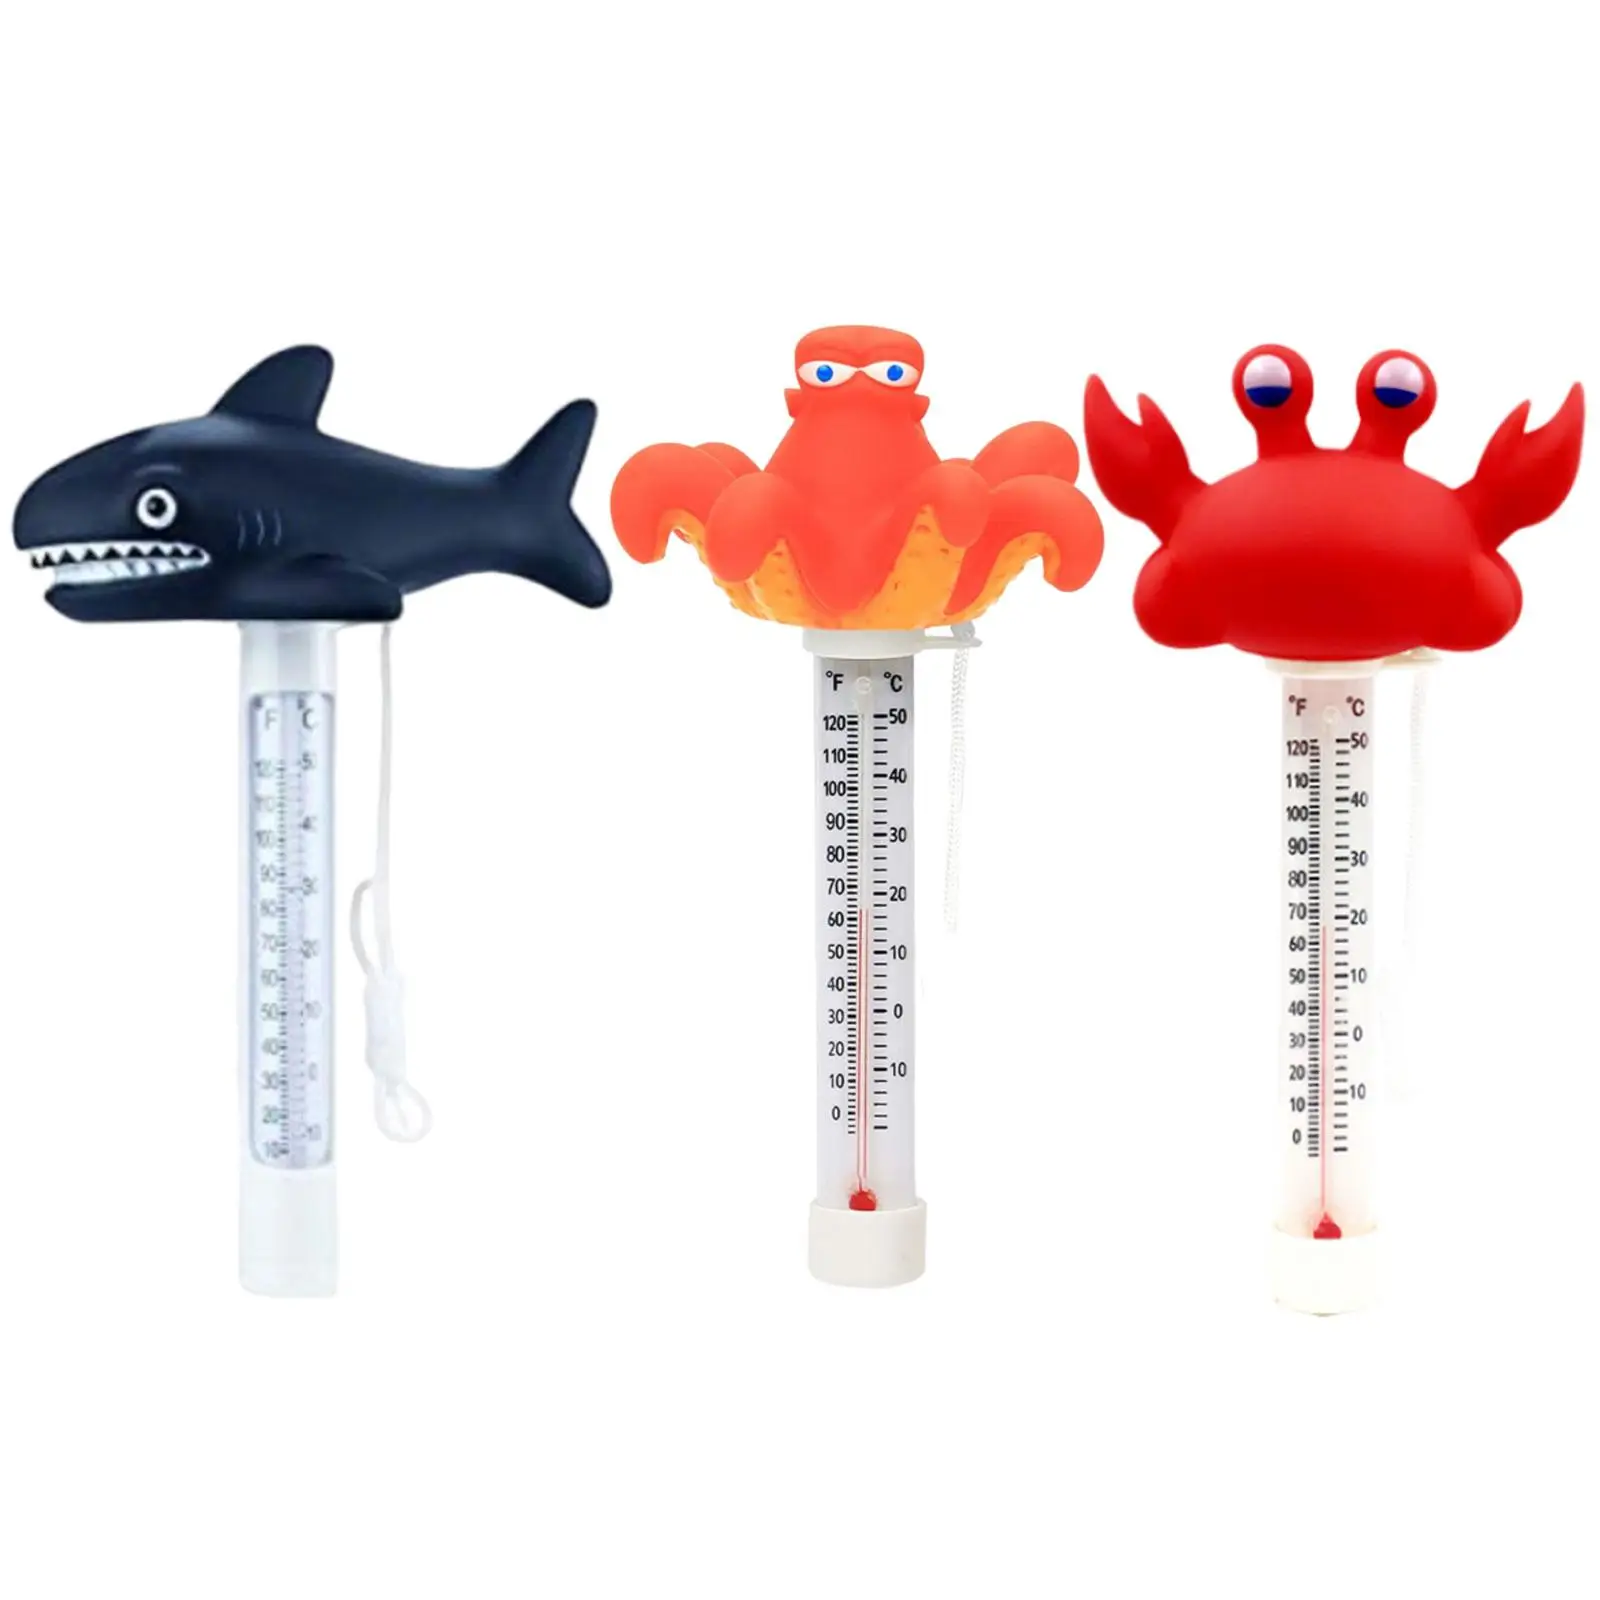 Pool Thermometer Floating Aquarium Thermometer Swimming Pool Thermometer Gauge Hot Tubs Pool Accessories for Spas